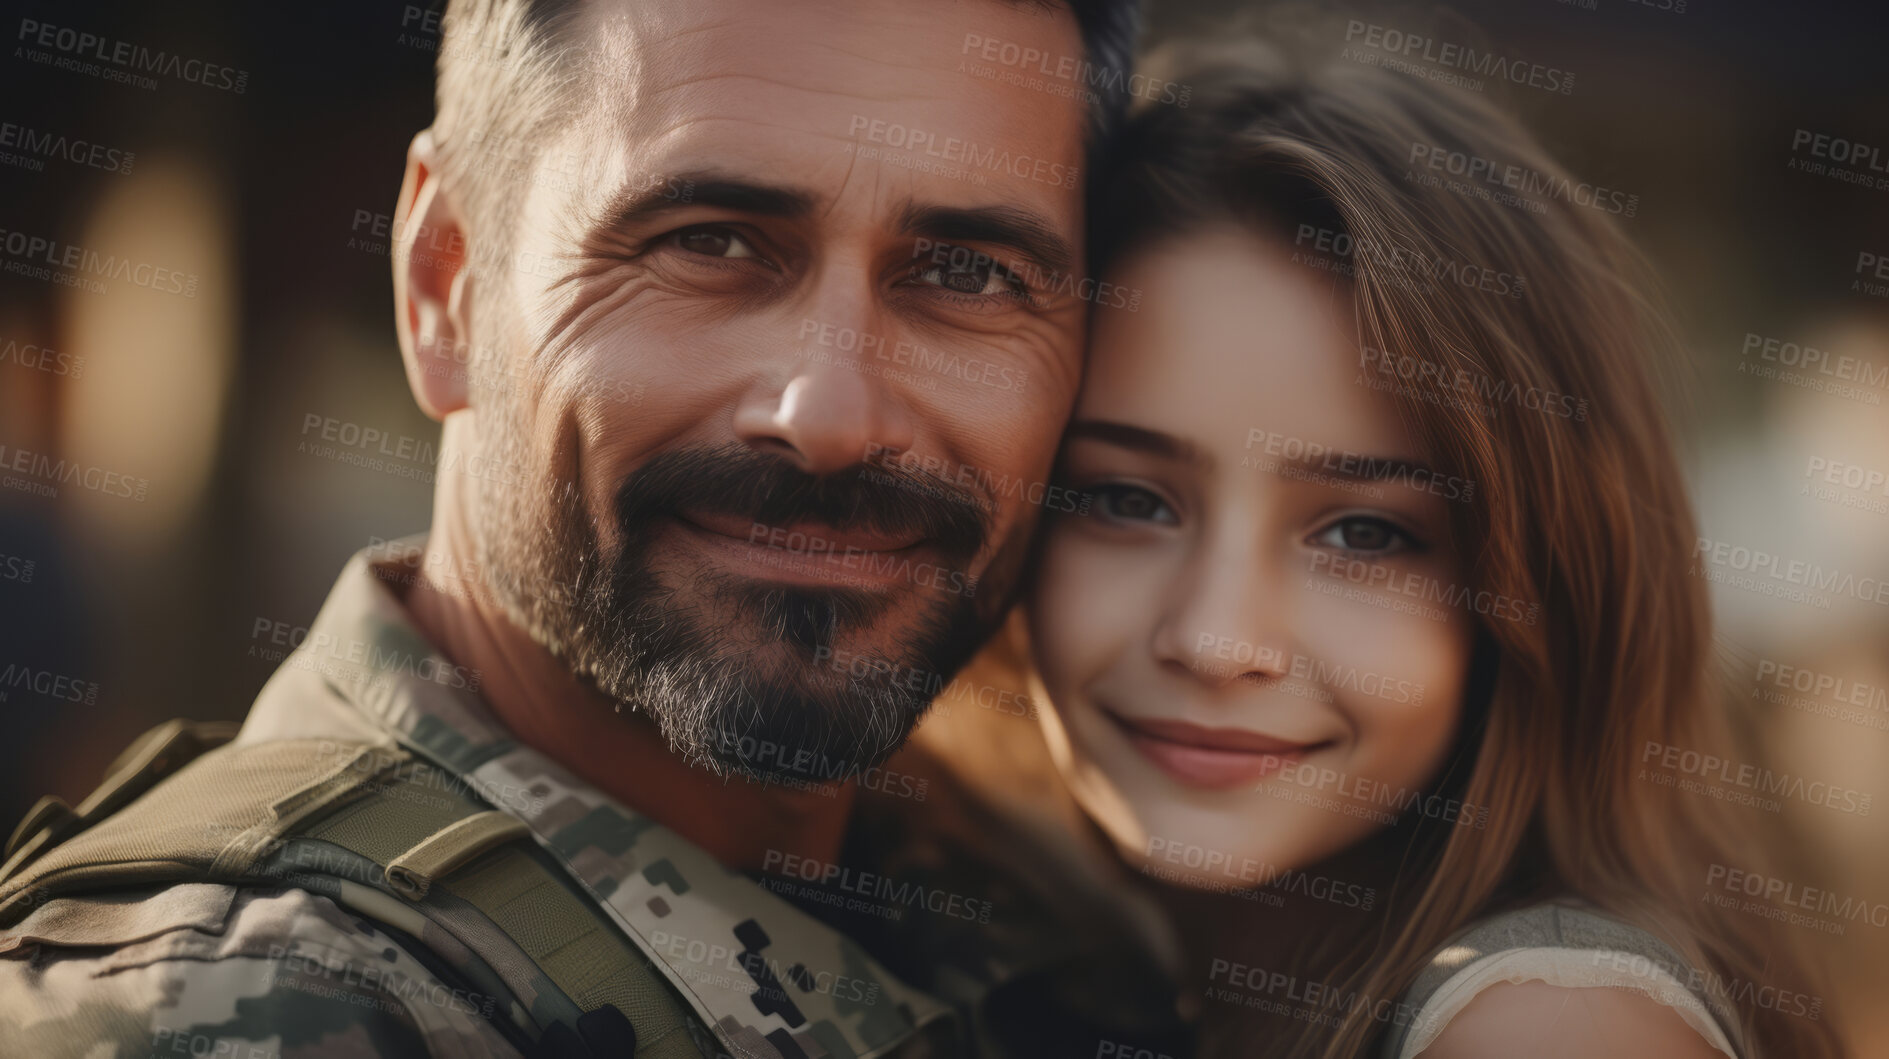 Buy stock photo Close-up portrait of soldier with child. Veteran homecoming concept.